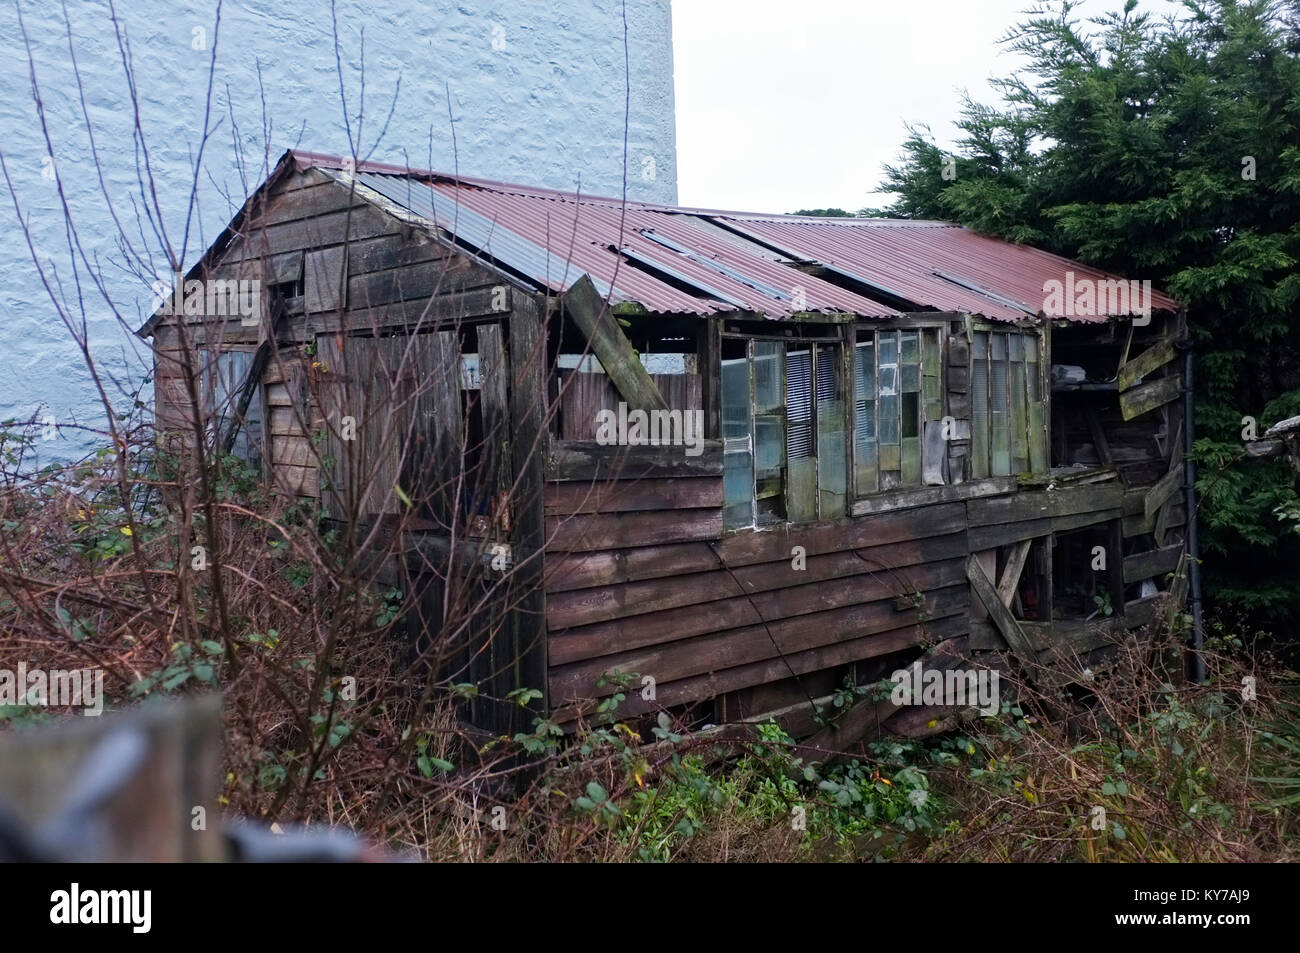 A dilapidated shed Stock Photo